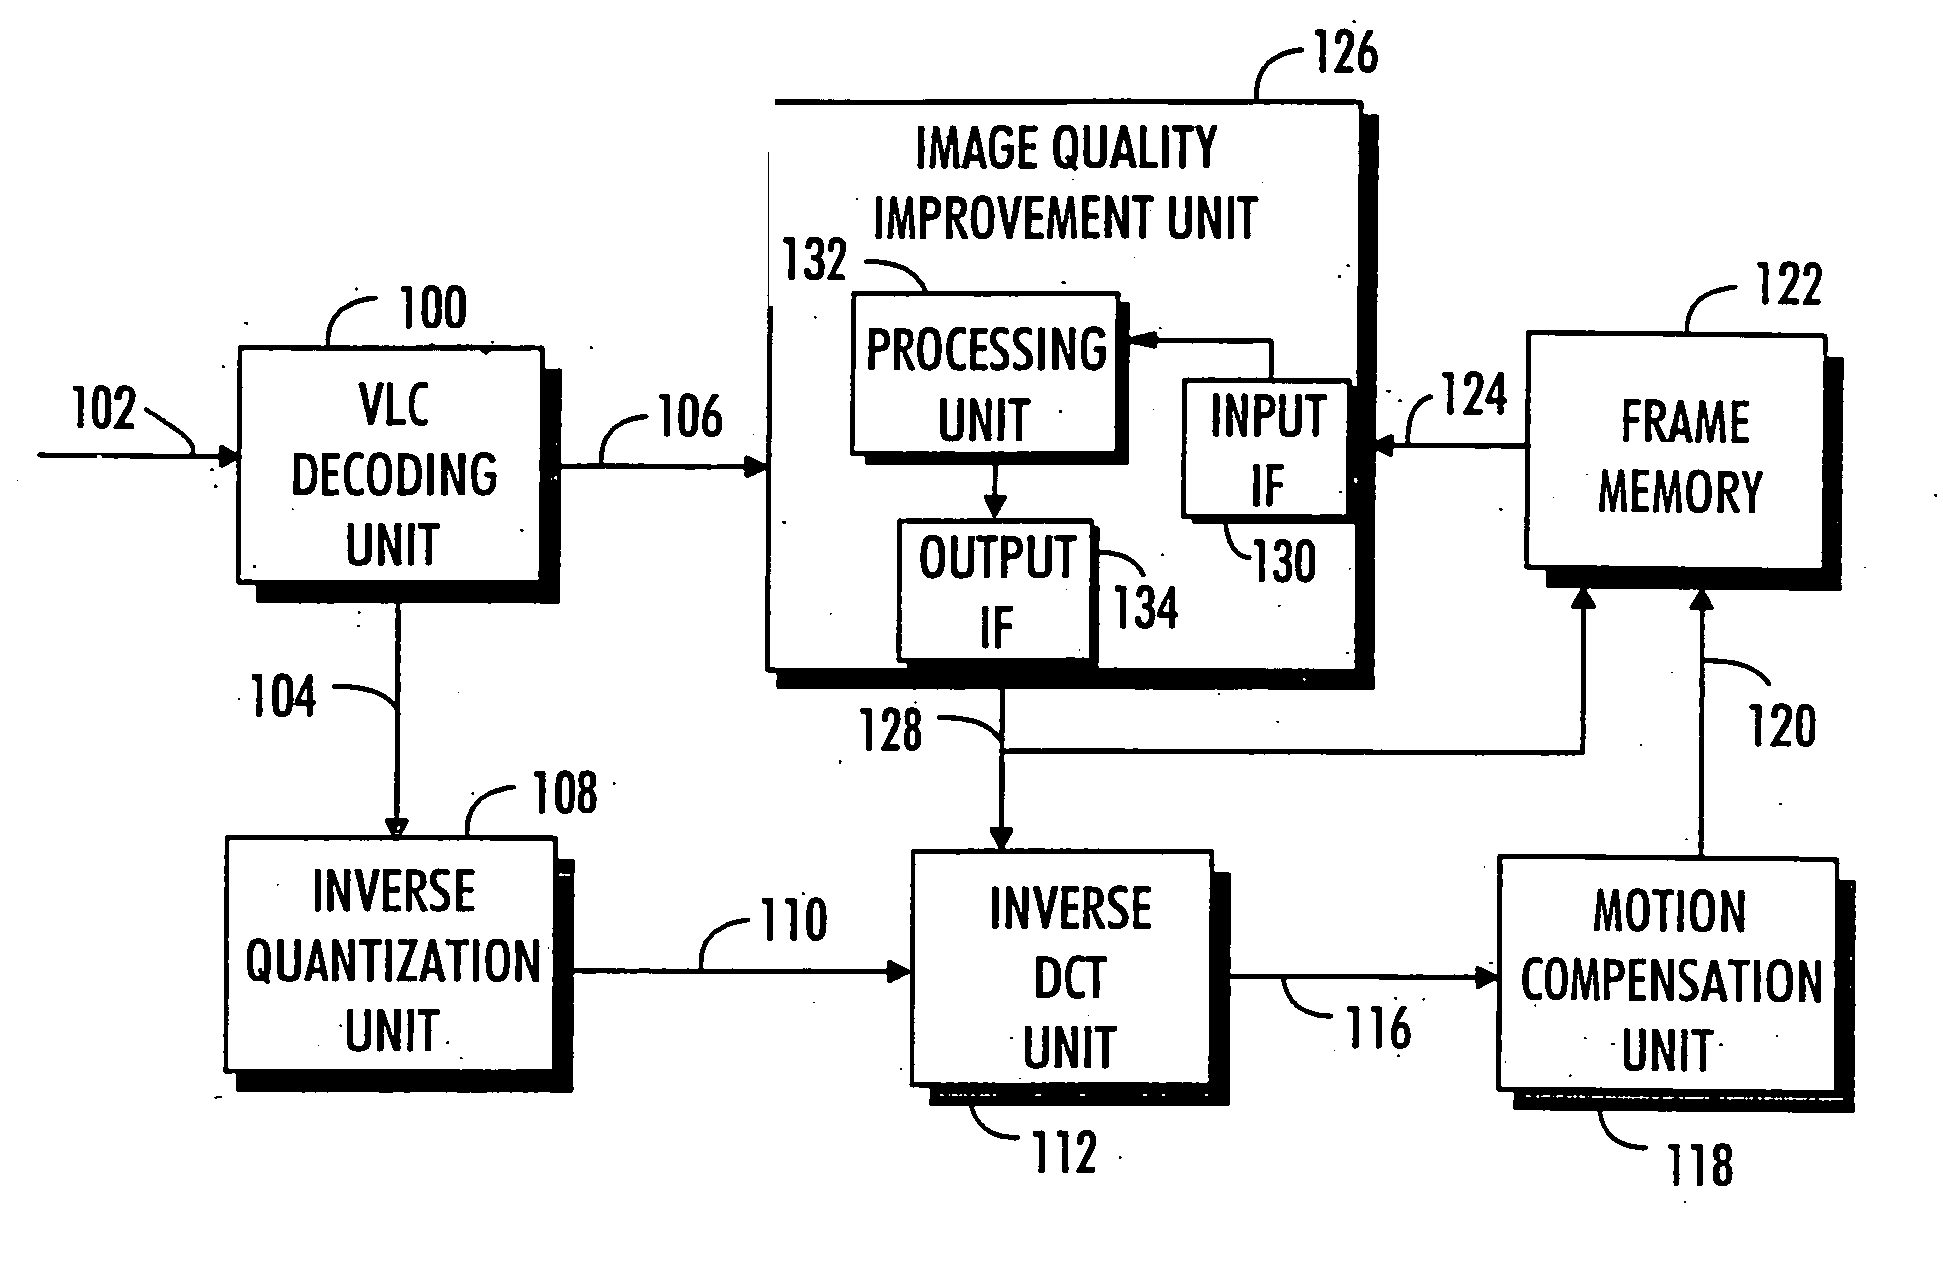 Apparatuses, computer program product and method for digital image quality improvement